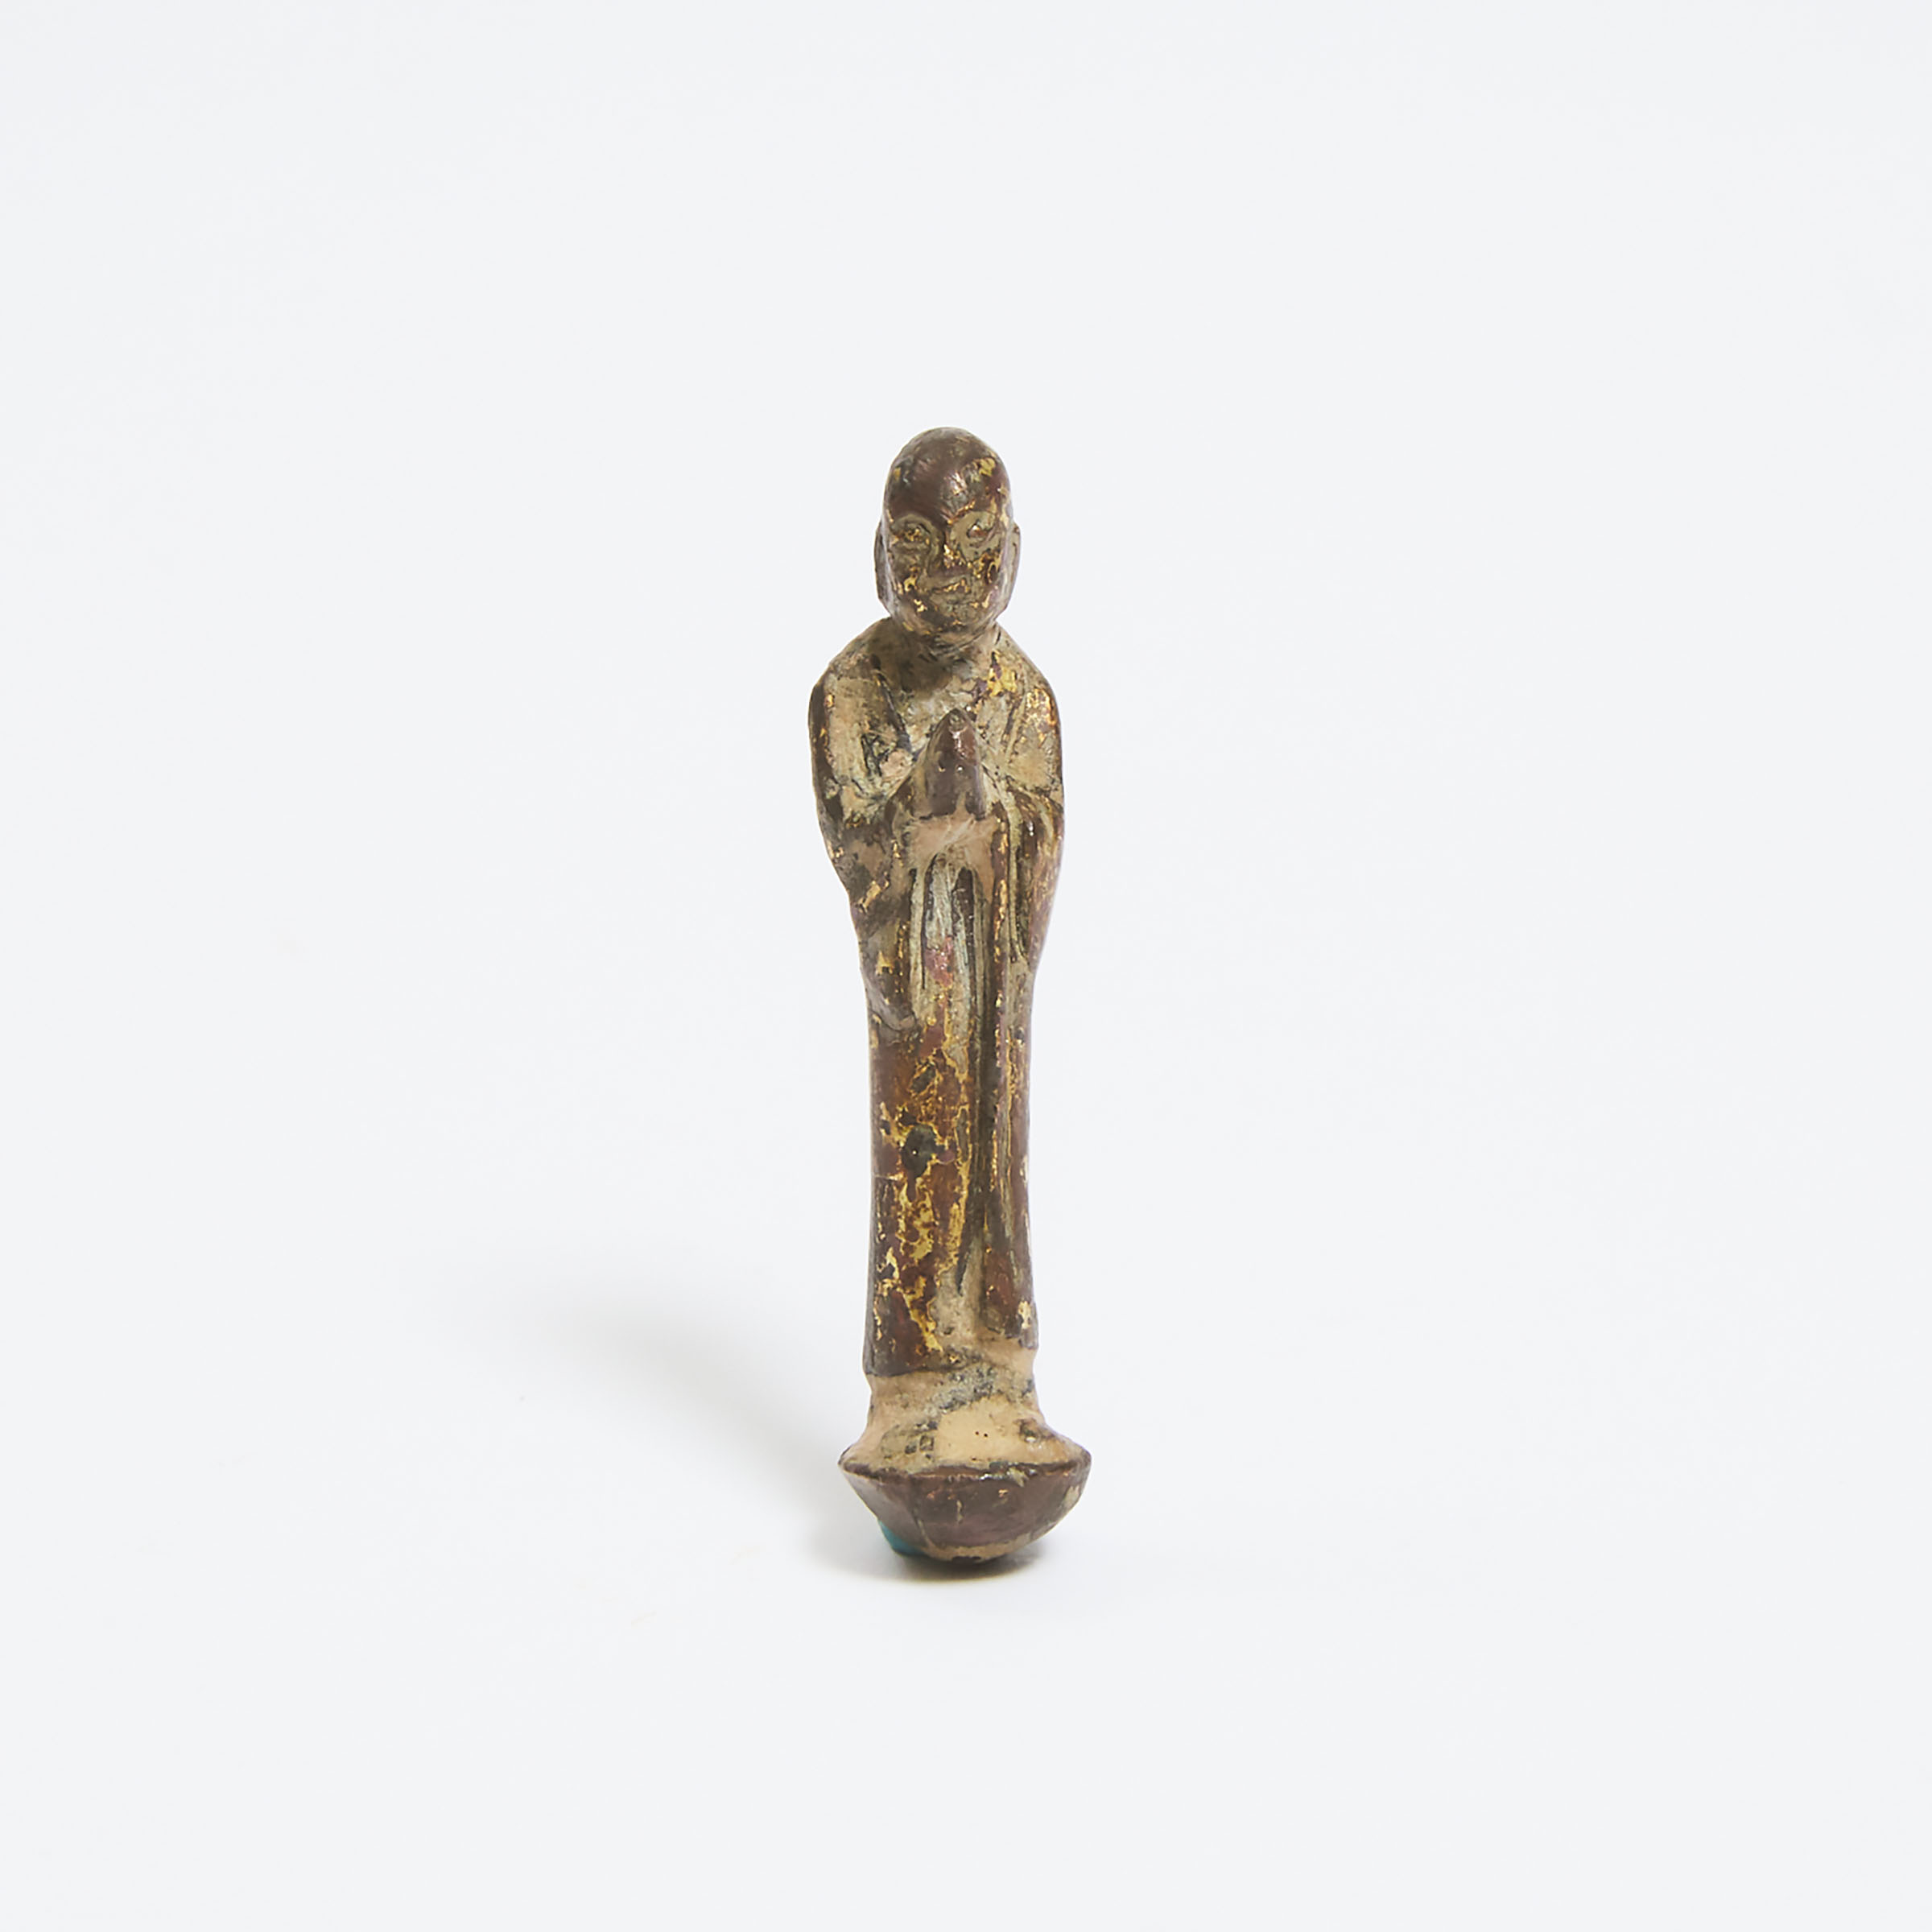 A Miniature Gilt Bronze Figure of a Monk (Ananda), Tang Dynasty (AD 618-907)